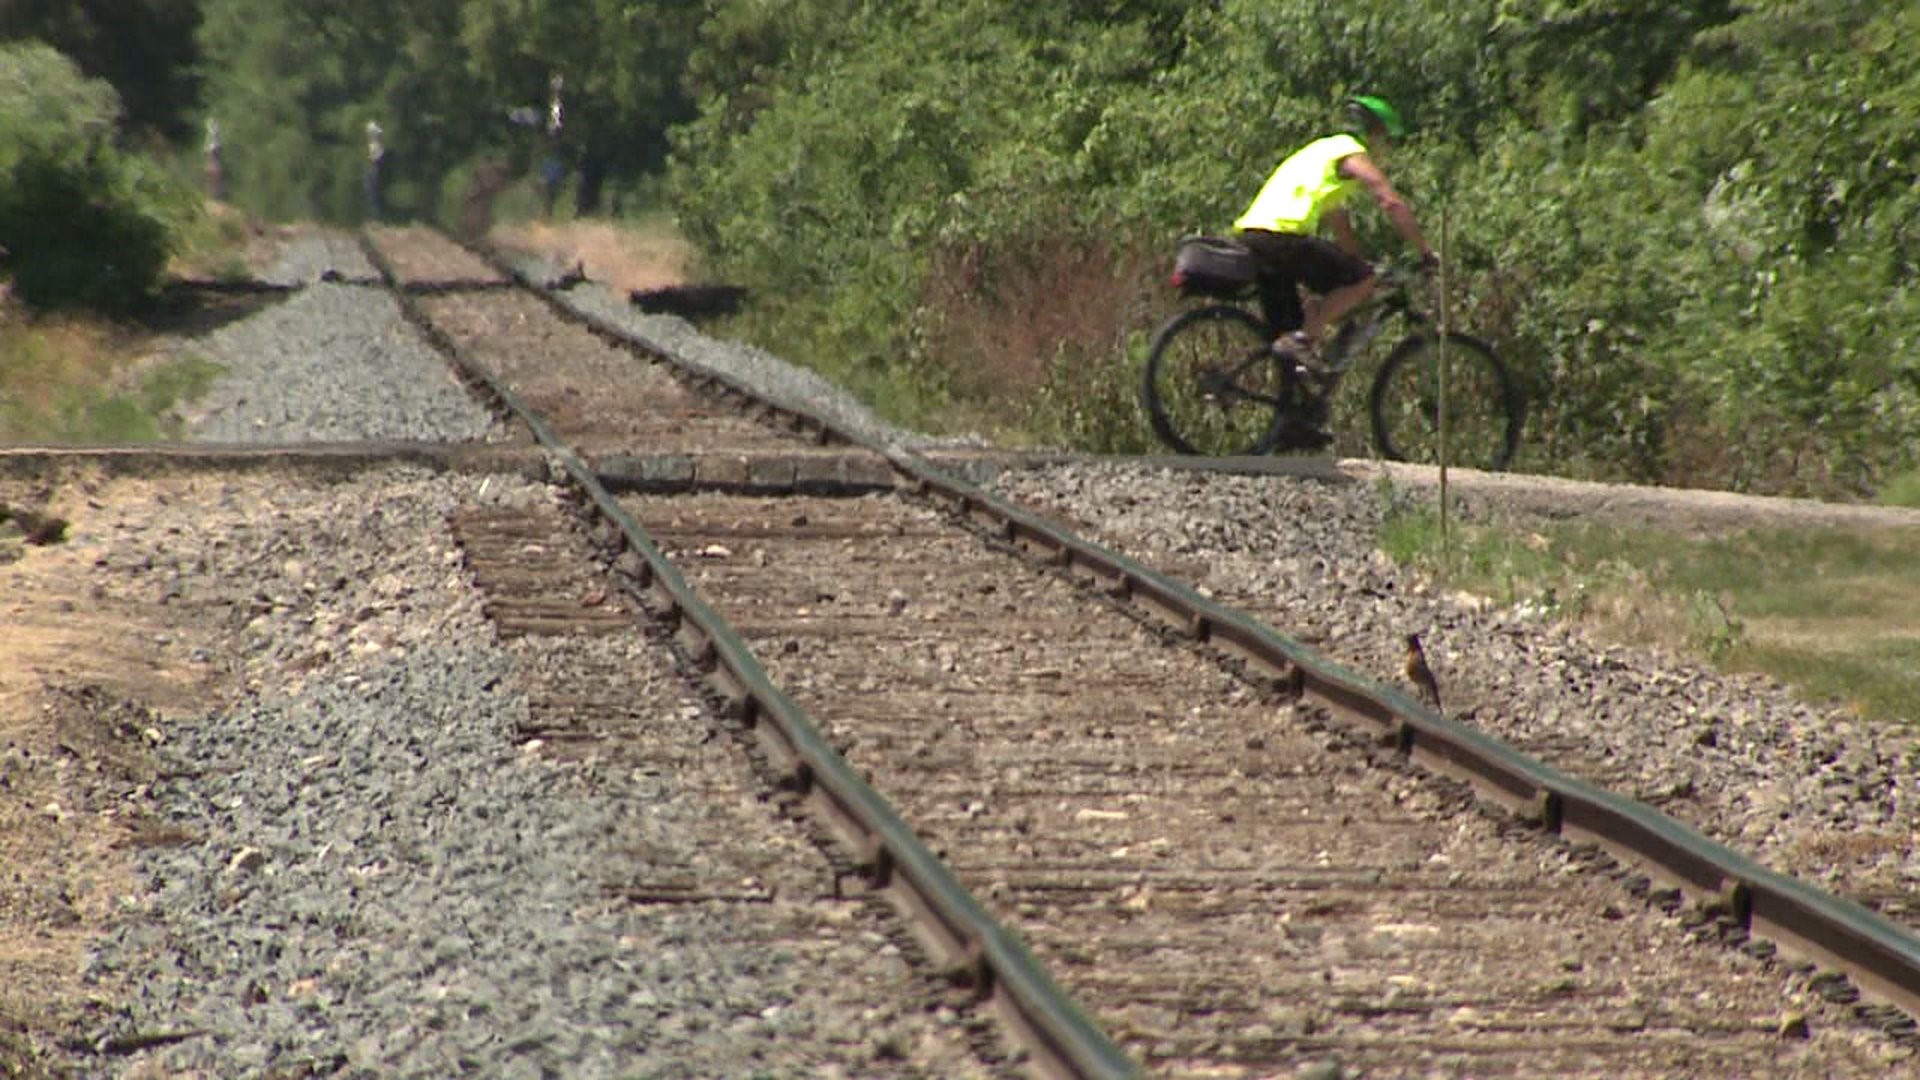 Trains allowed to go faster between East Moline and Cordova